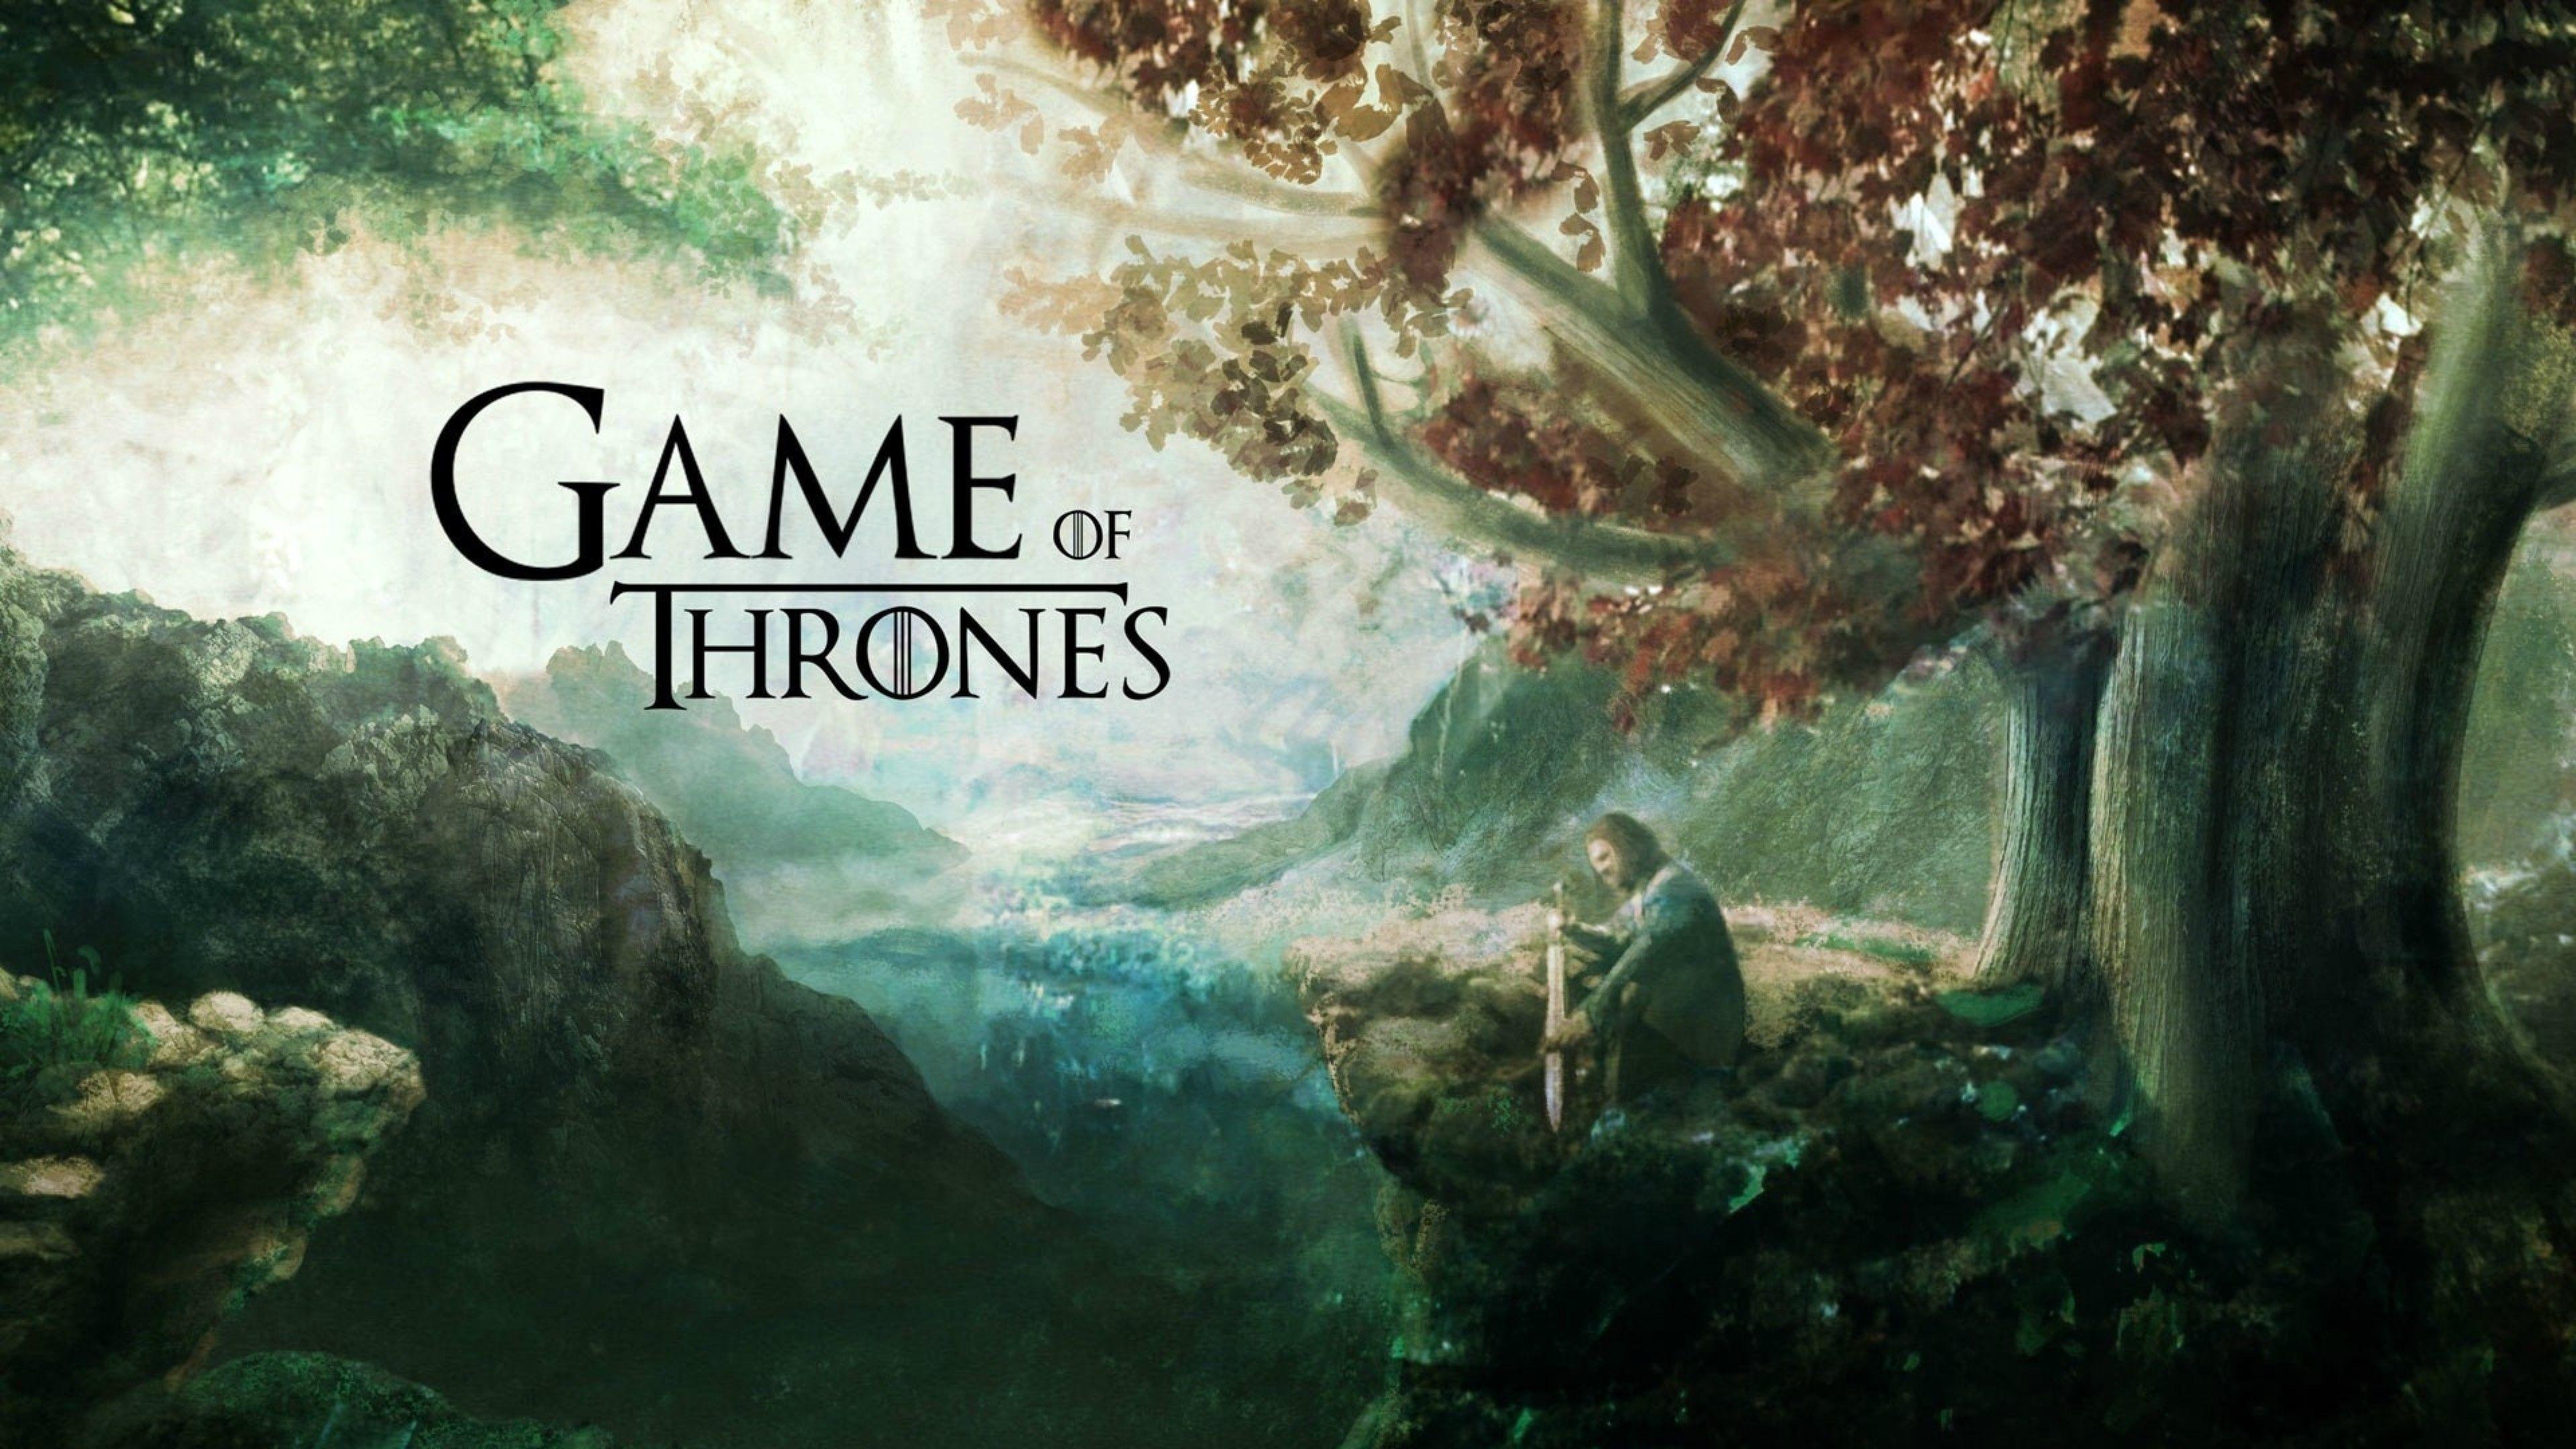 Game of Thrones wallpapers ·① Download free awesome HD wallpapers of